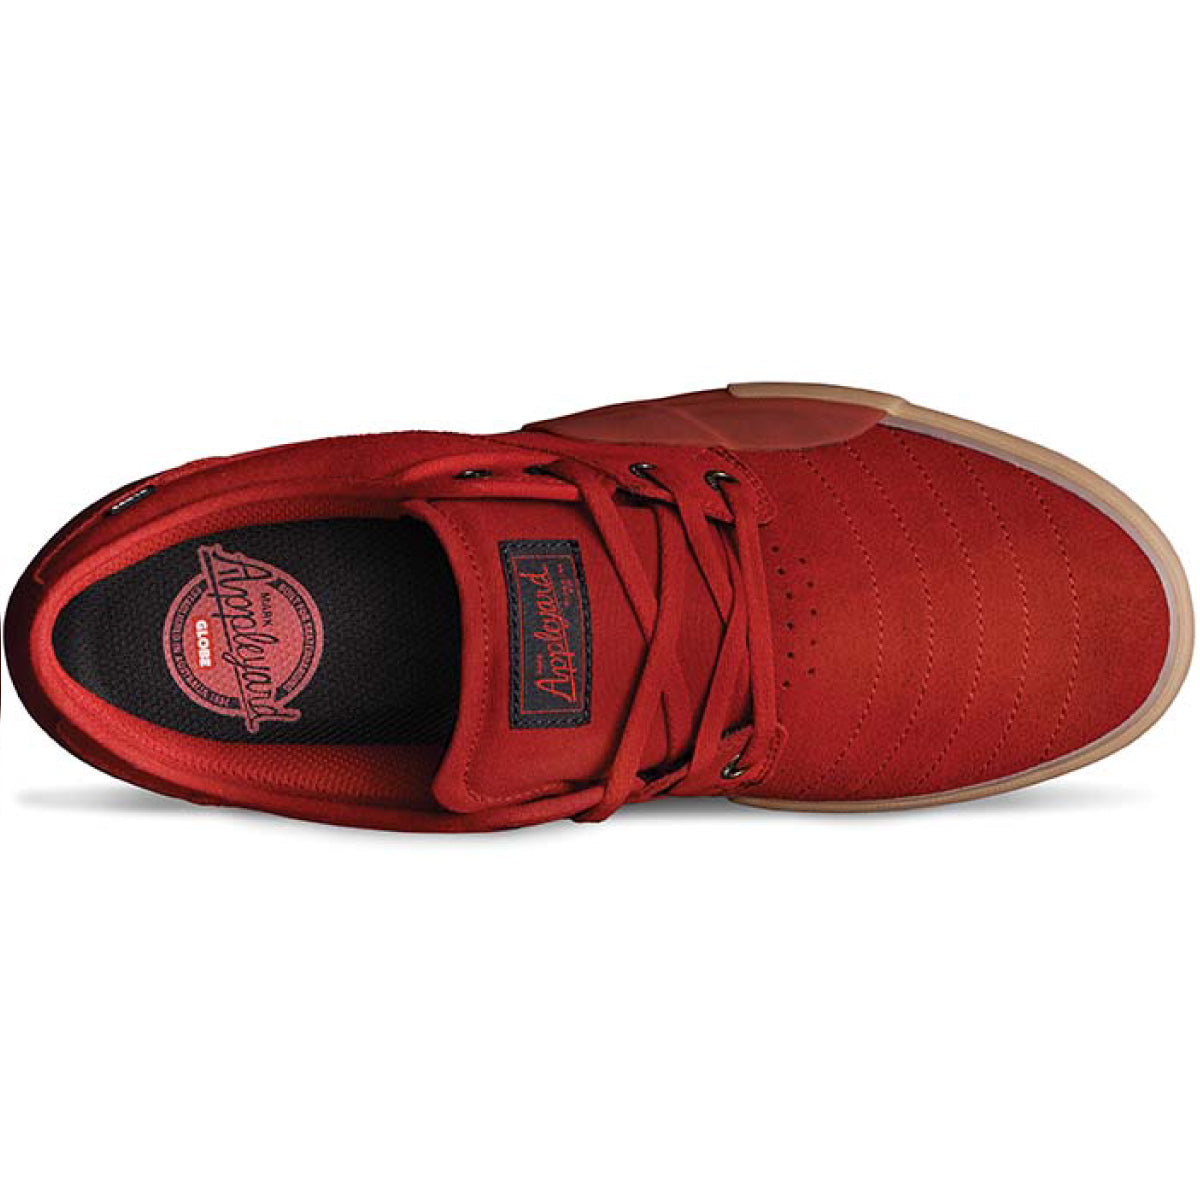 Globe Low shoes Mahalo Plus in Red/Gum